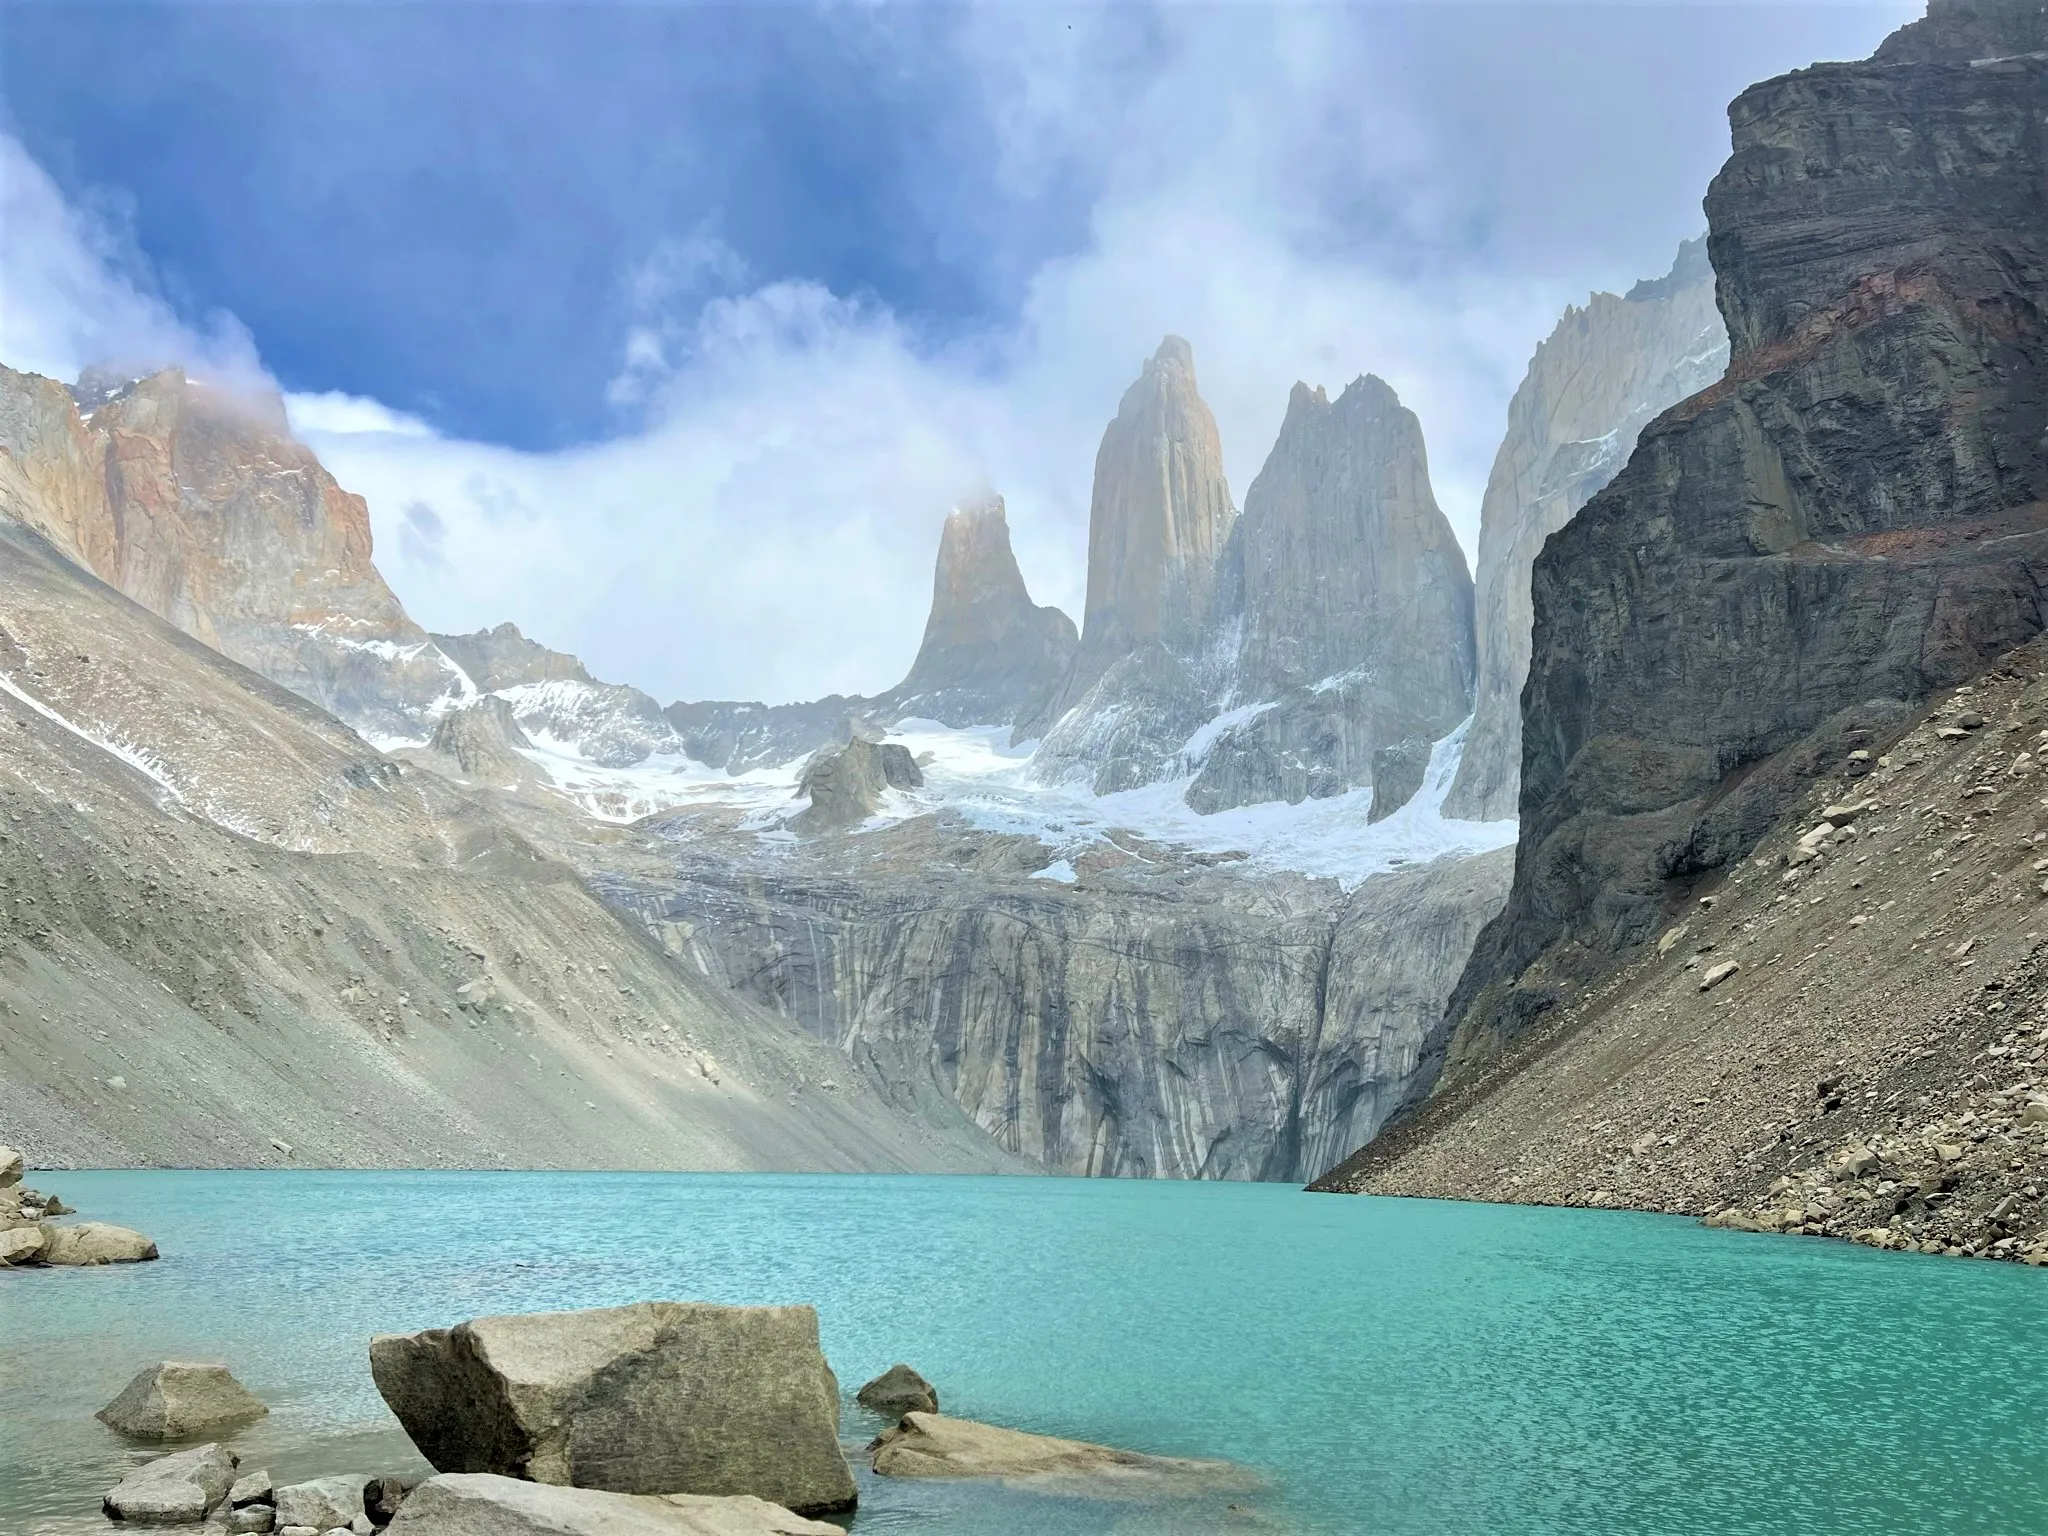 Las Torres Base Viewpoint in Chile, South America | Observation Decks - Rated 4